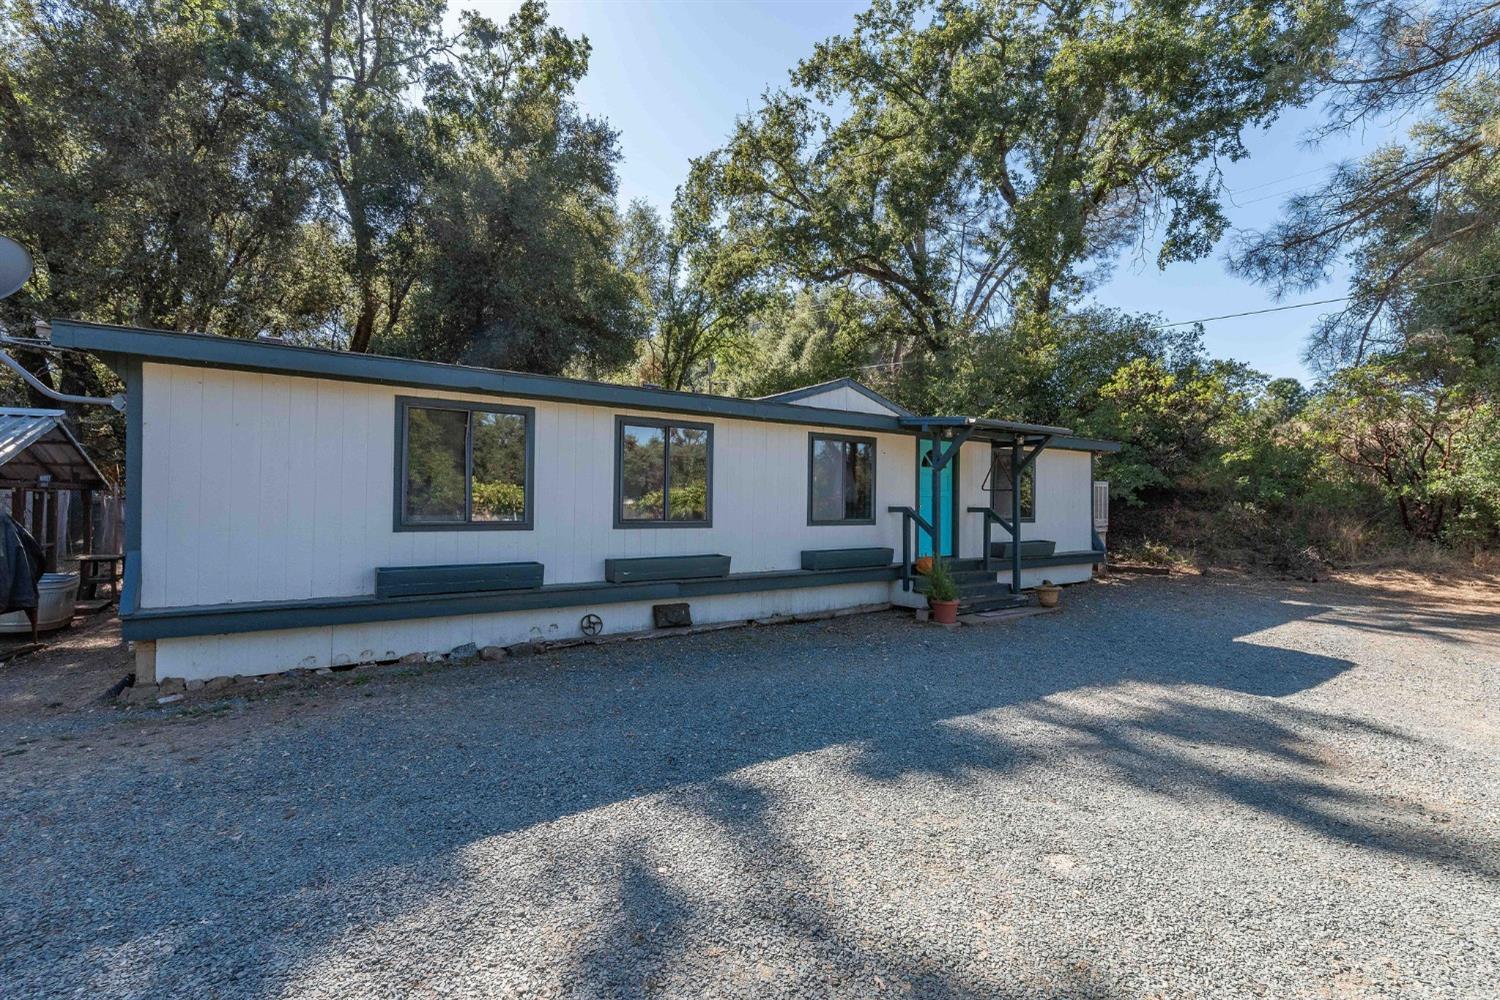 Photo of 13930 Fiddletown Rd in Fiddletown, CA